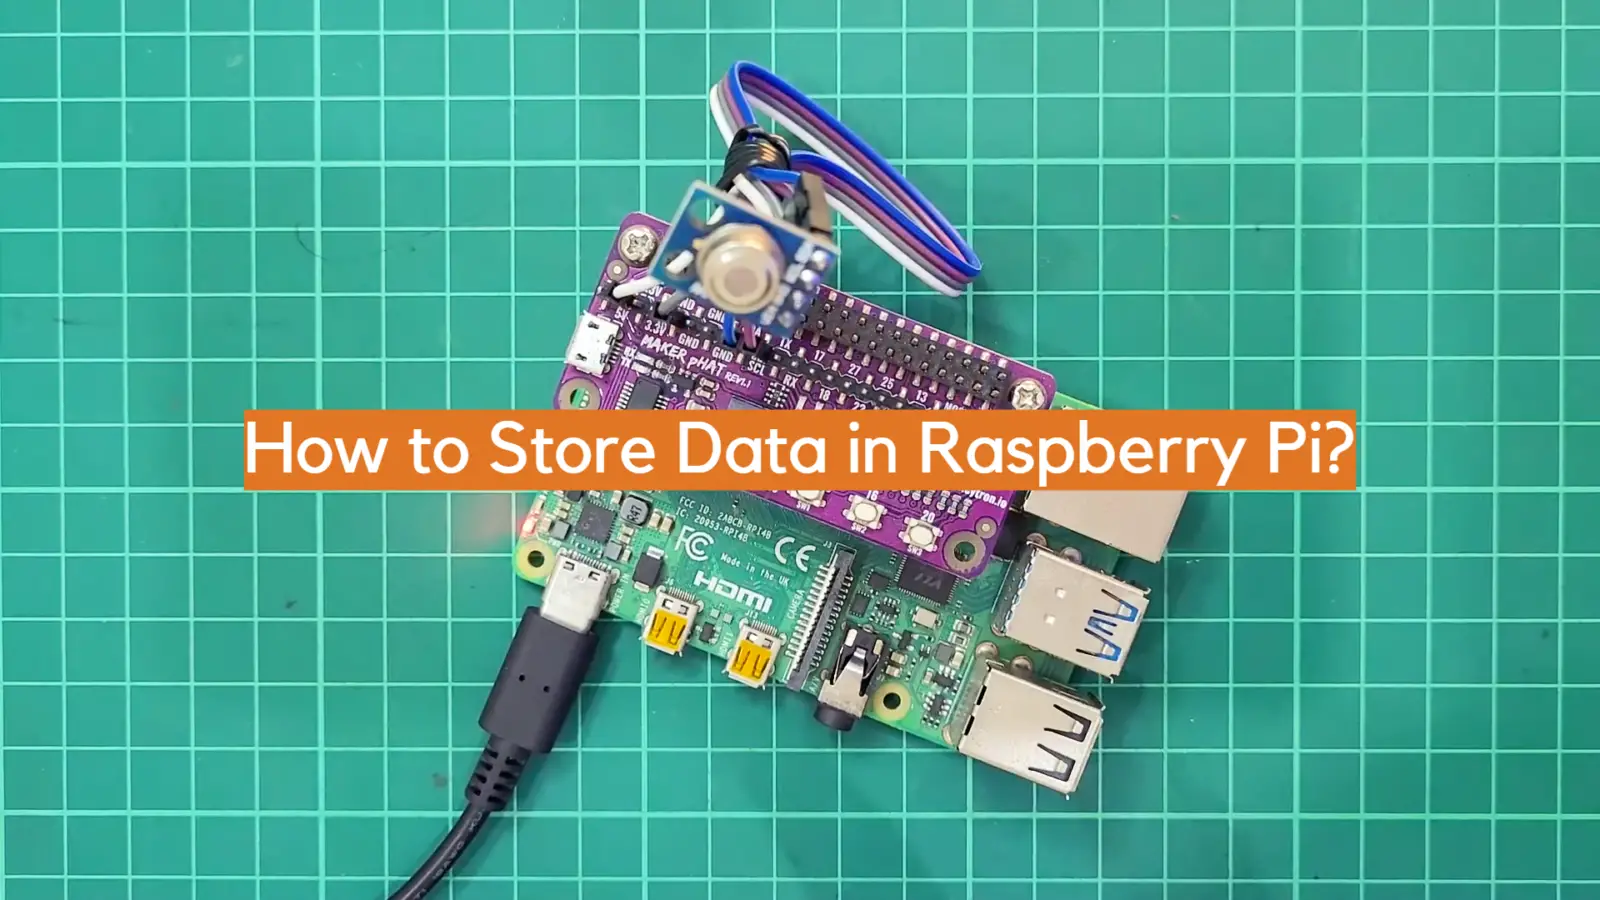 How to Store Data in Raspberry Pi?